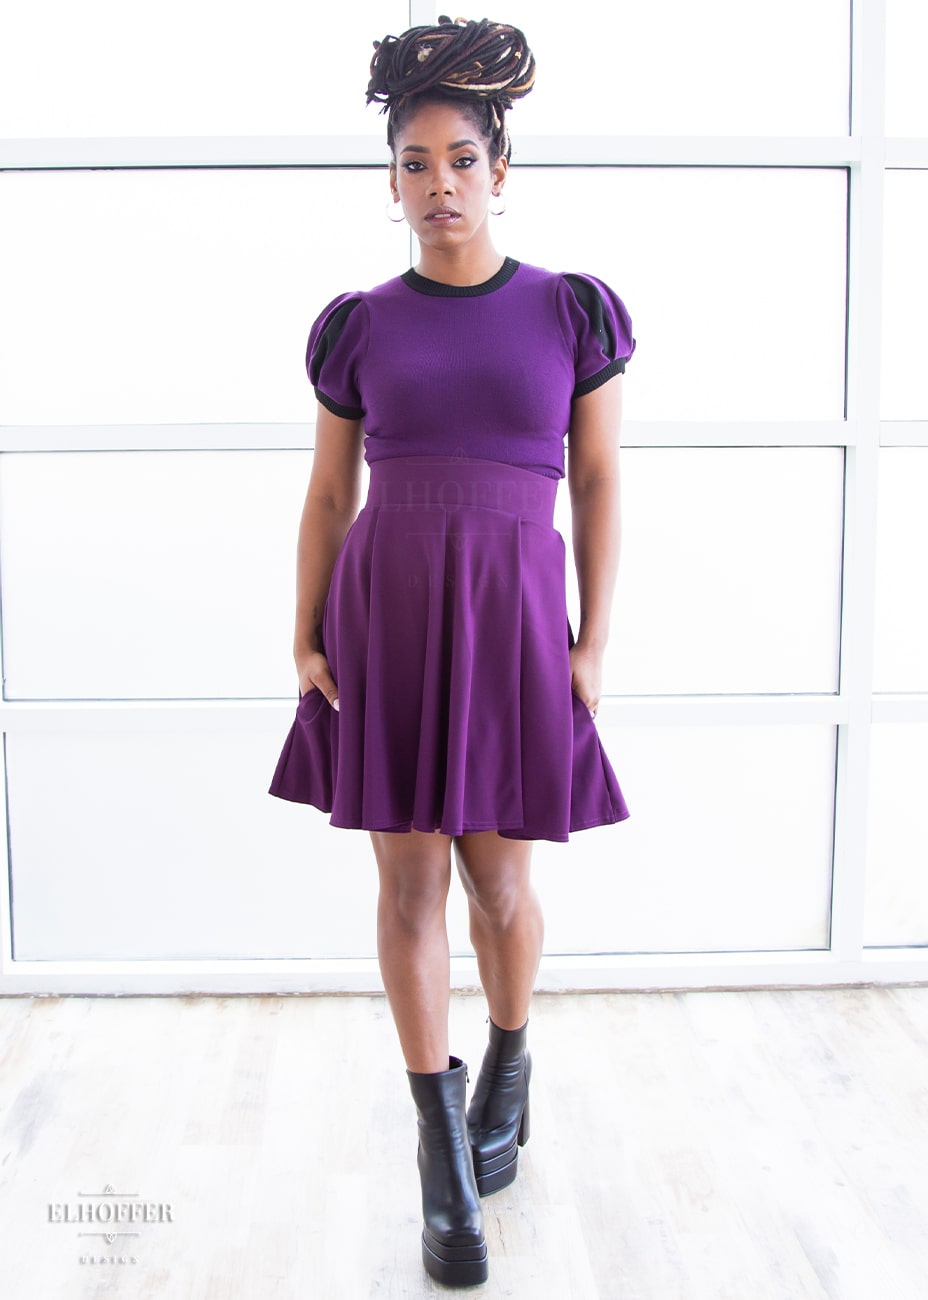 Krystina, a medium dark skinned S model with long braids in an updo, is wearing a purple knit short sleeve crop top with black ribbing along neckline and cuffs.  The sleeves are split puff sleeves with alternating colors of purple and black. She paired the knit top with a plum skater skirt.